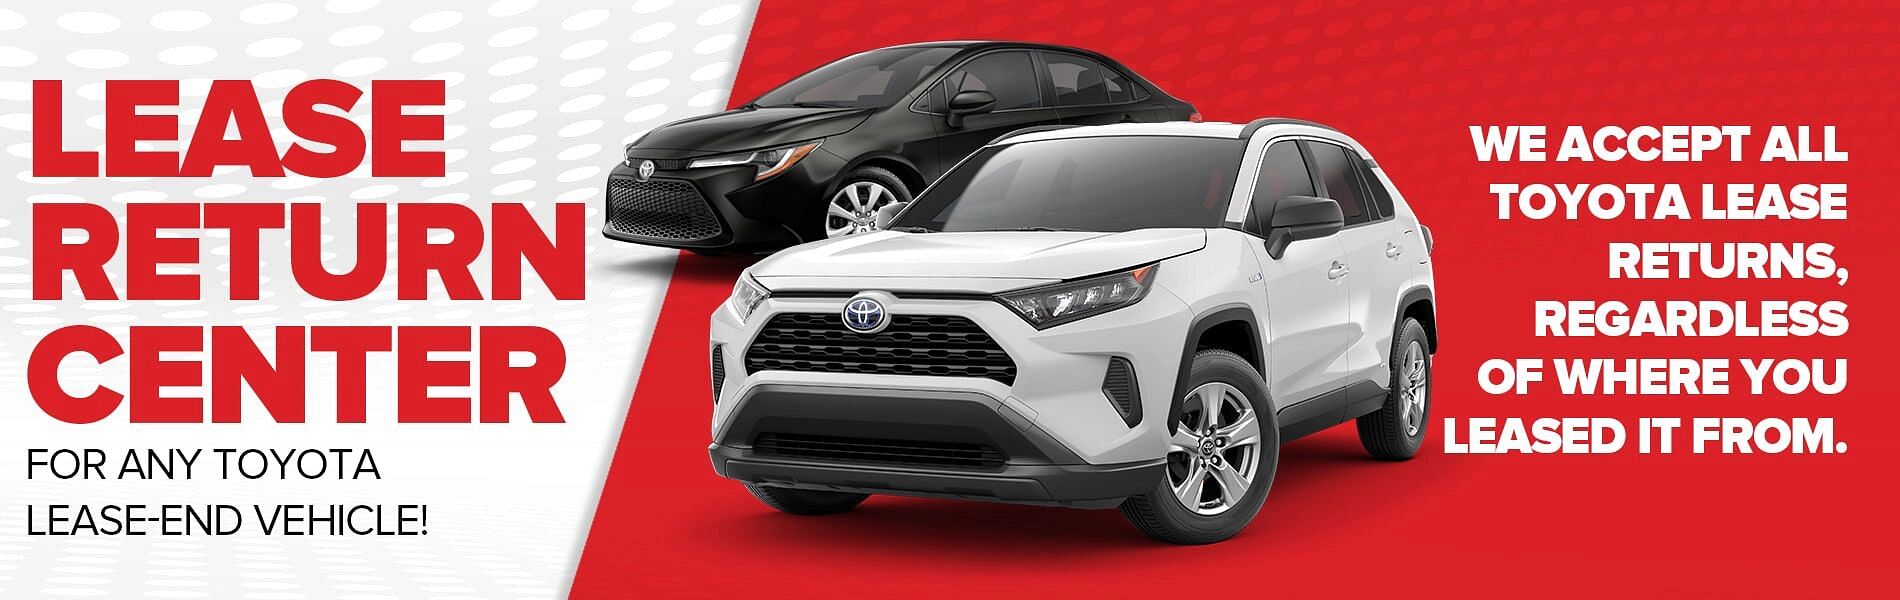 Lease Return Center for your Toyota Vehicle